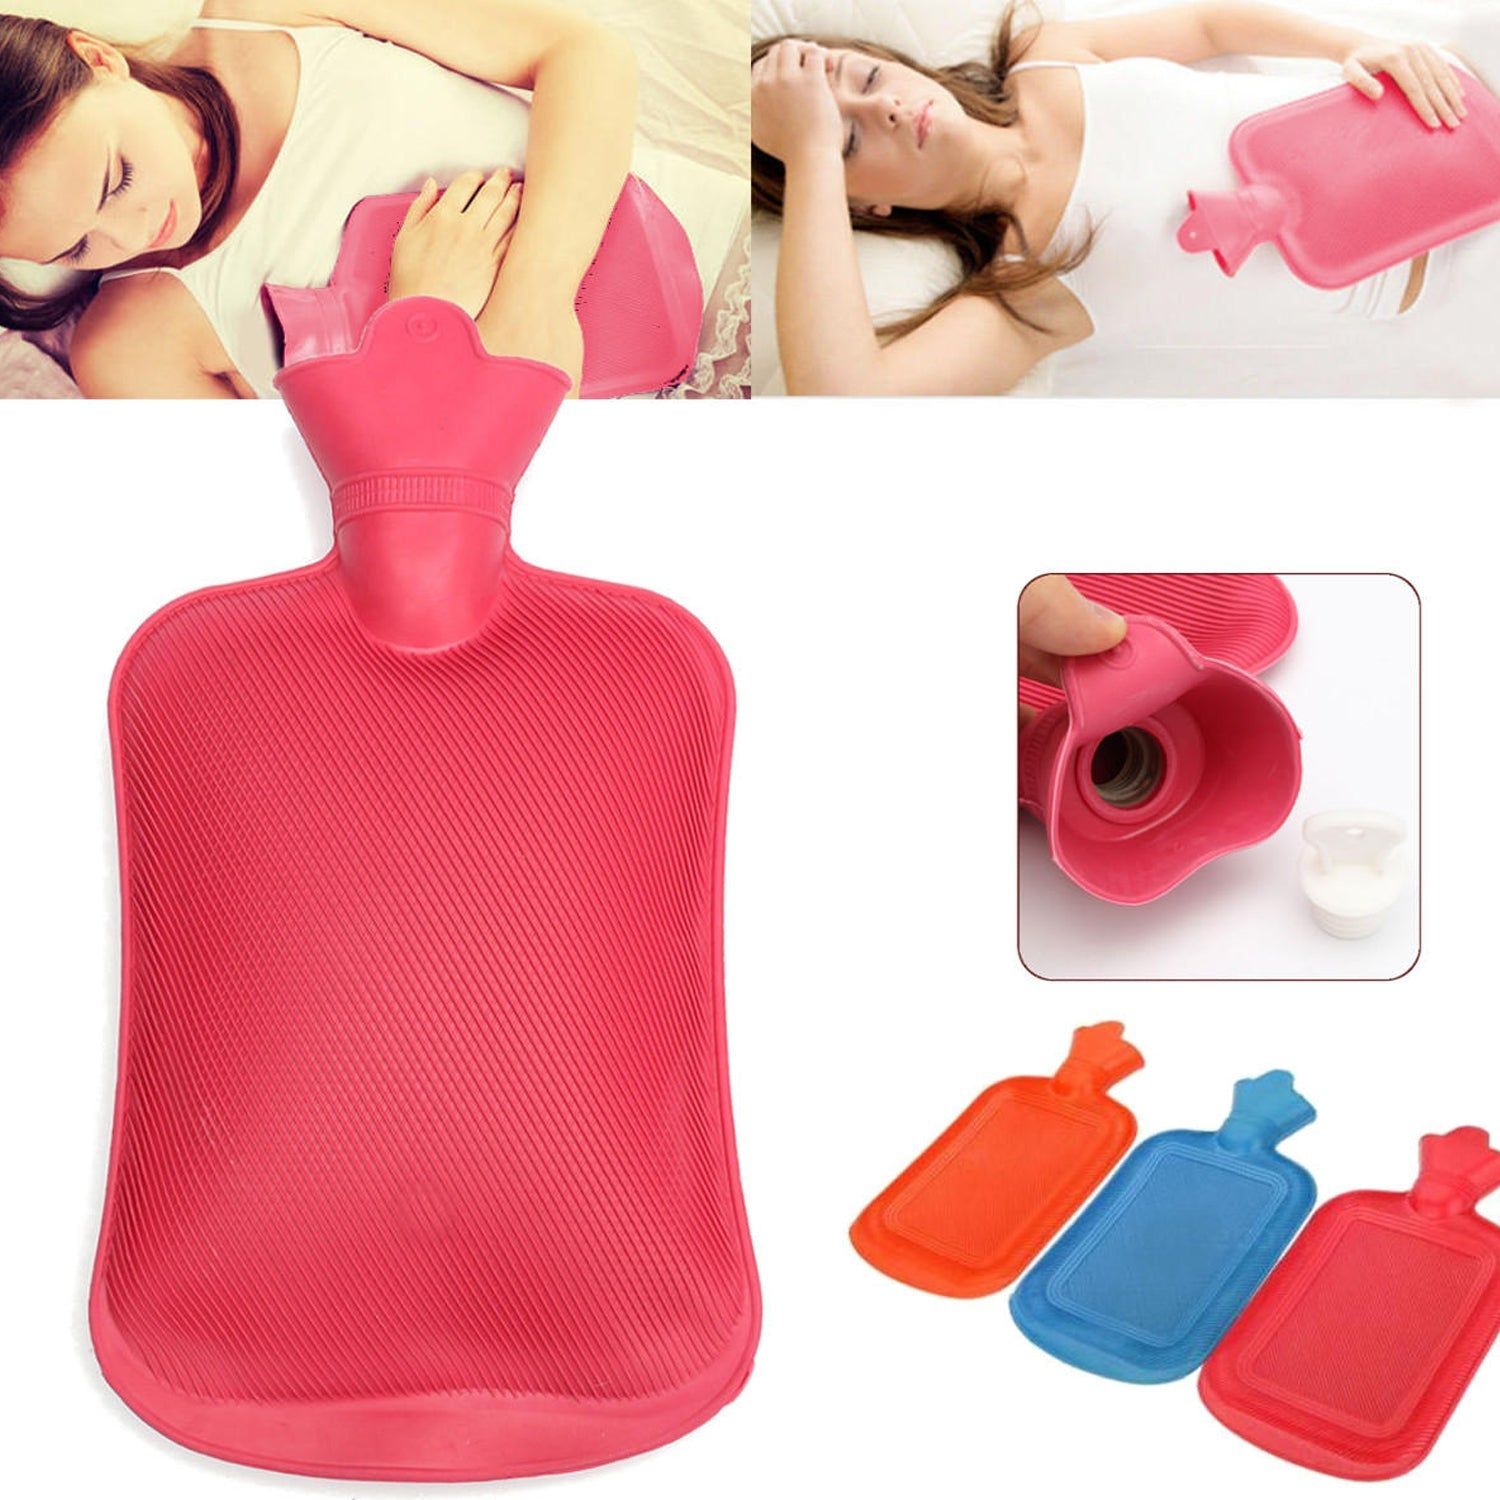 0395 Rubber Hot Water Heating Pad Bag For Pain Relief (Small)